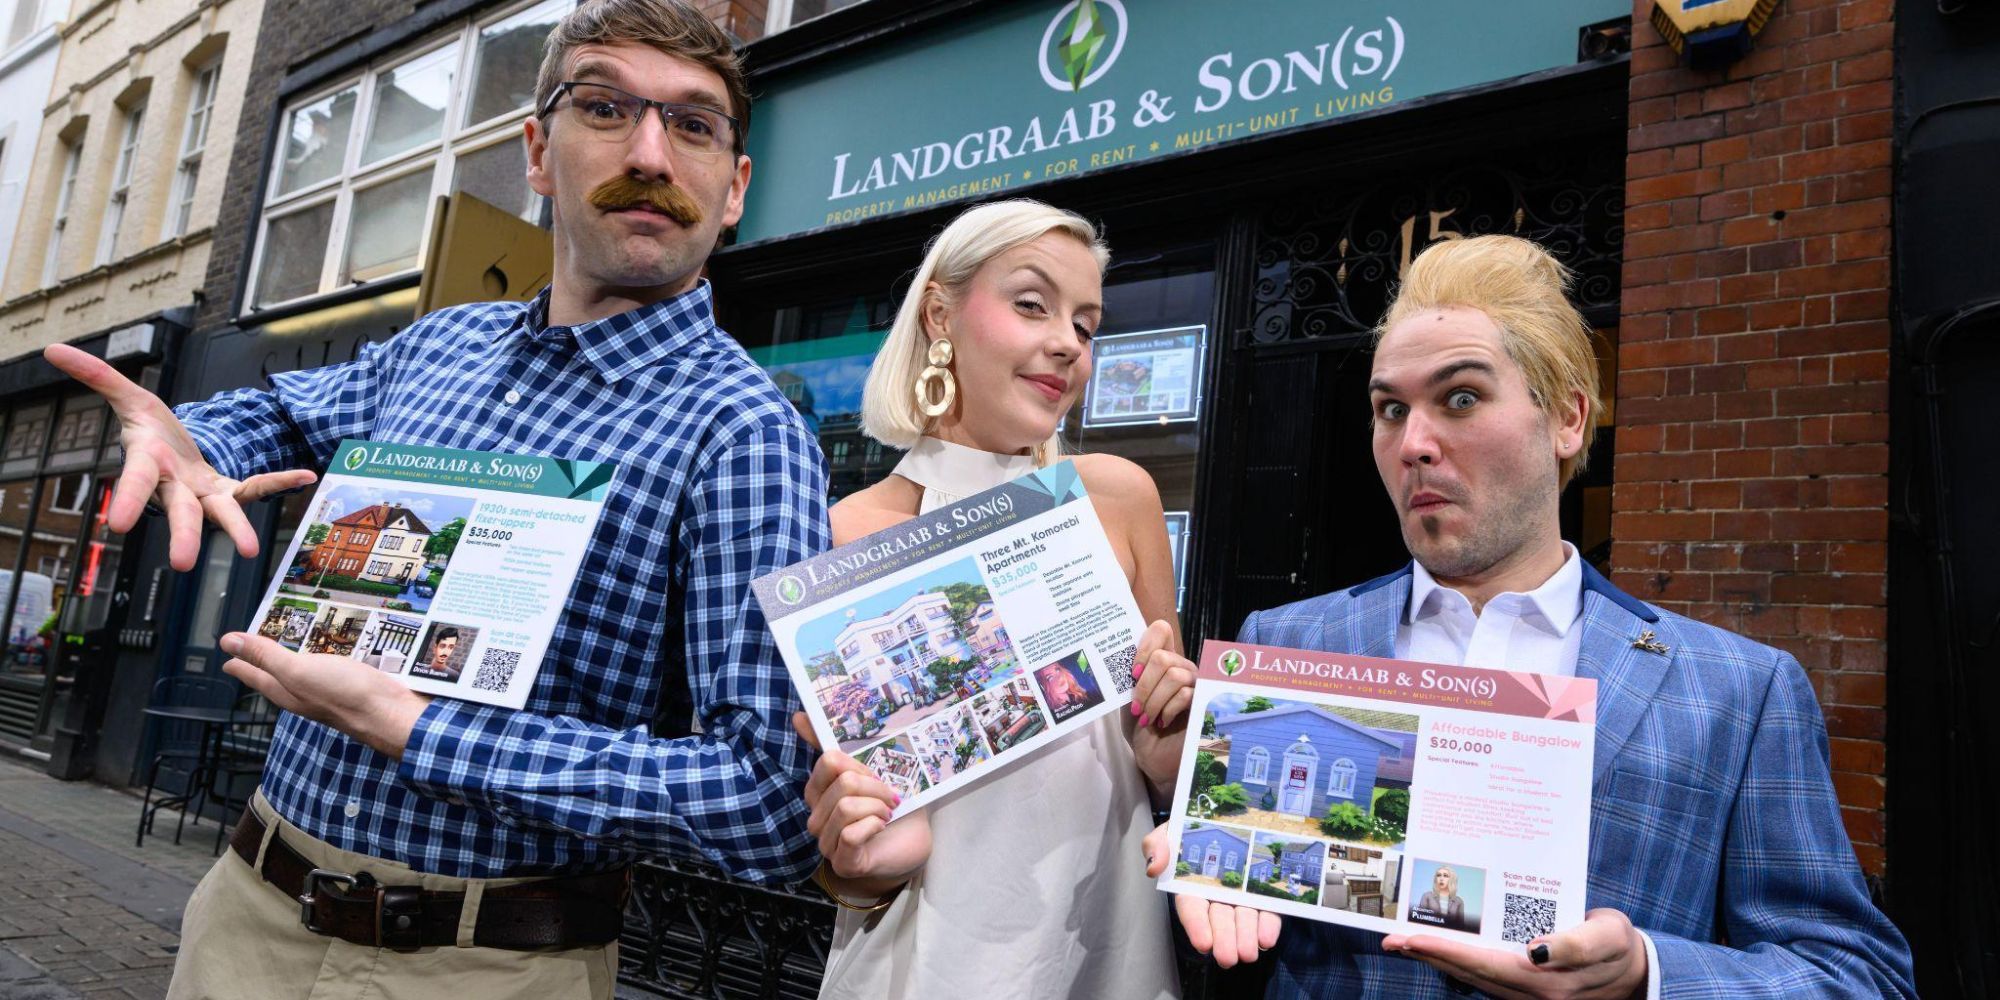 Landgraab & Son(s) estate agents pop up in London for The Sims 4 For Rent.